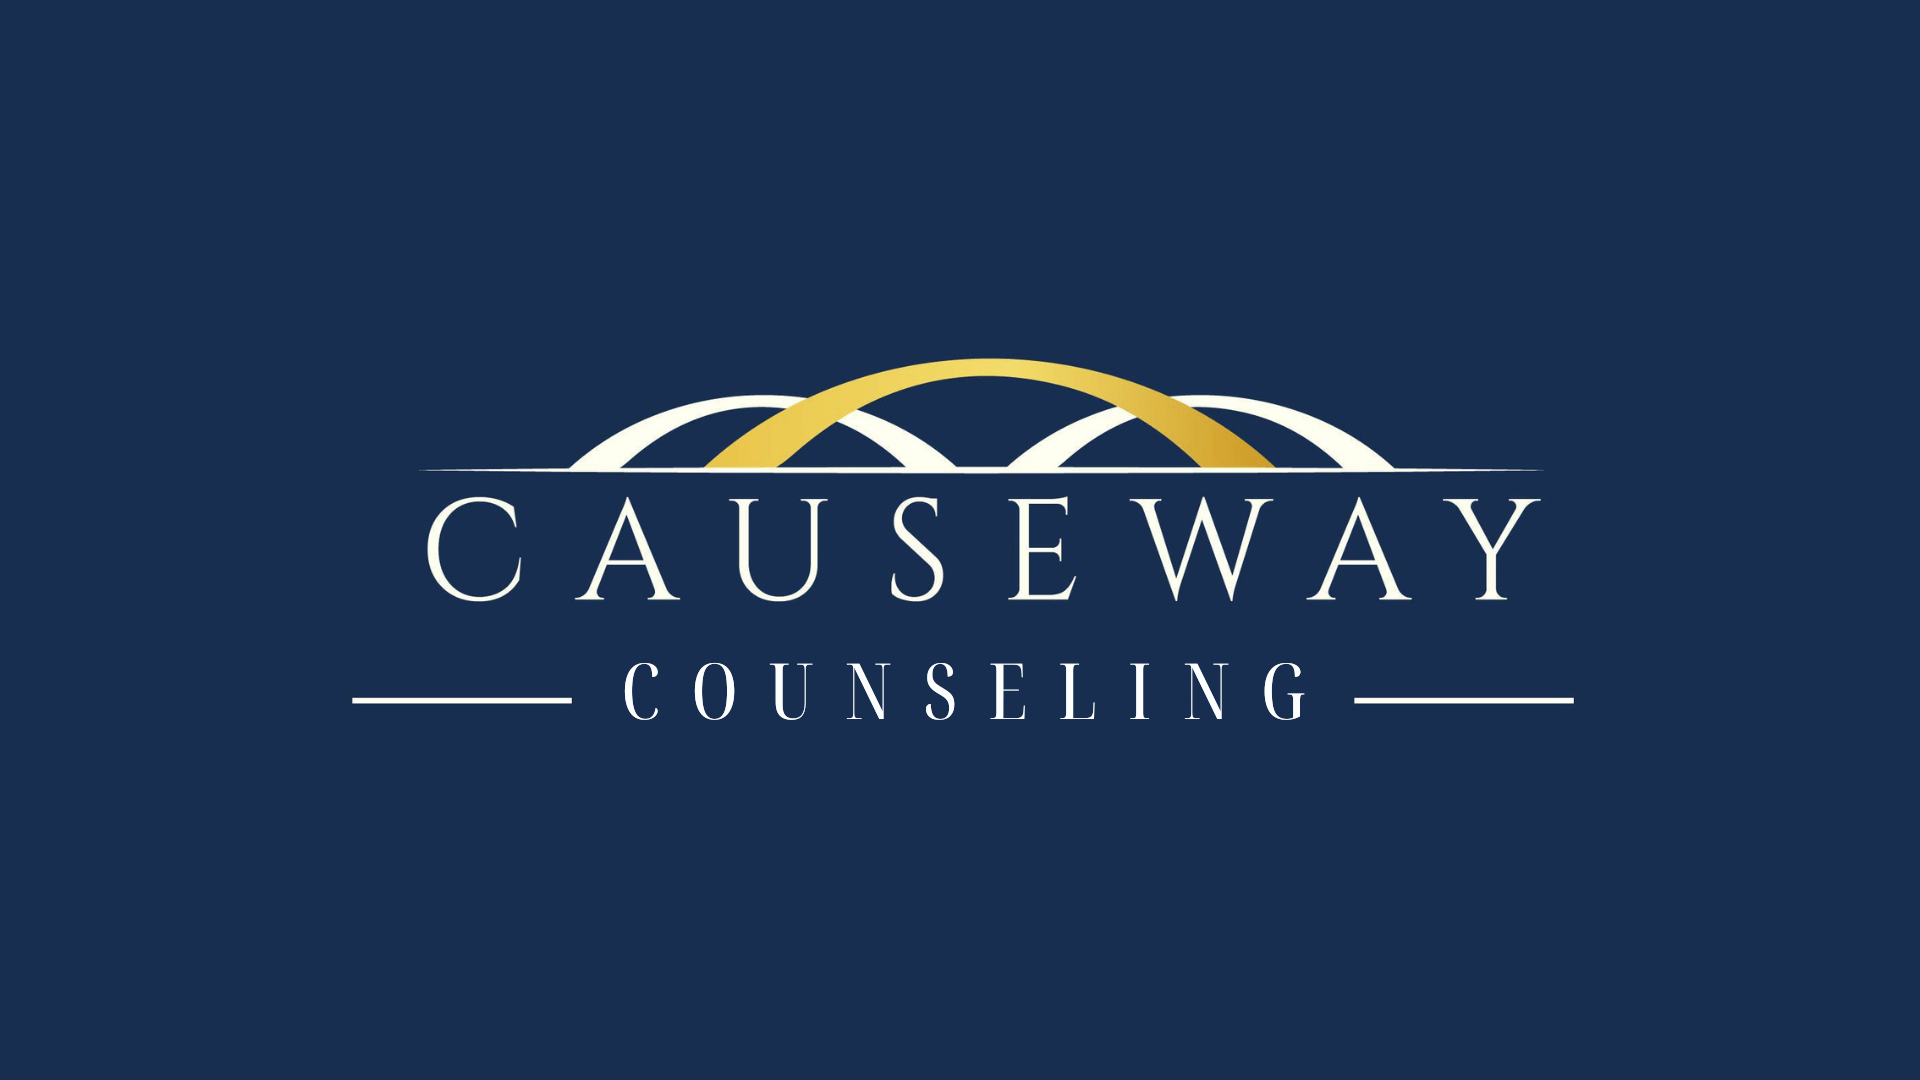 The logo for Causeway Counseling has a solid navy blue background, the word Causeway in white all capital letters with the word counseling in all white, but smaller capital letters underneath, and three low arches above both sets of text. Two white arches with a yellow arch in front of them.